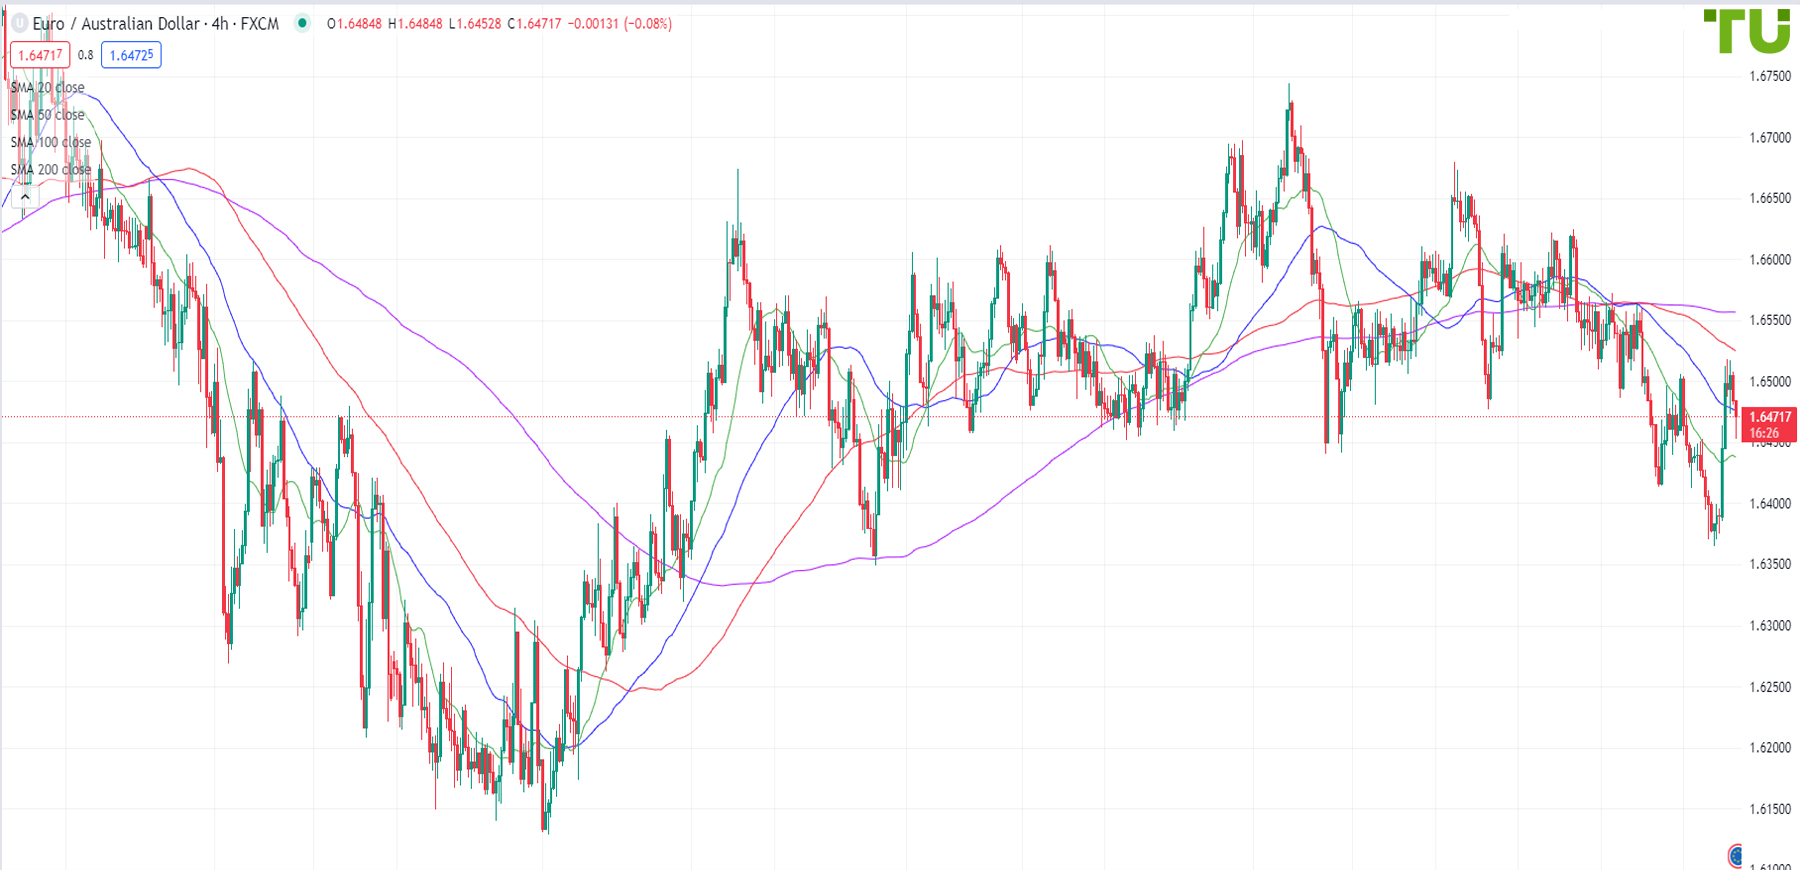 Euro/Aussie soared towards resistance at 1.6515